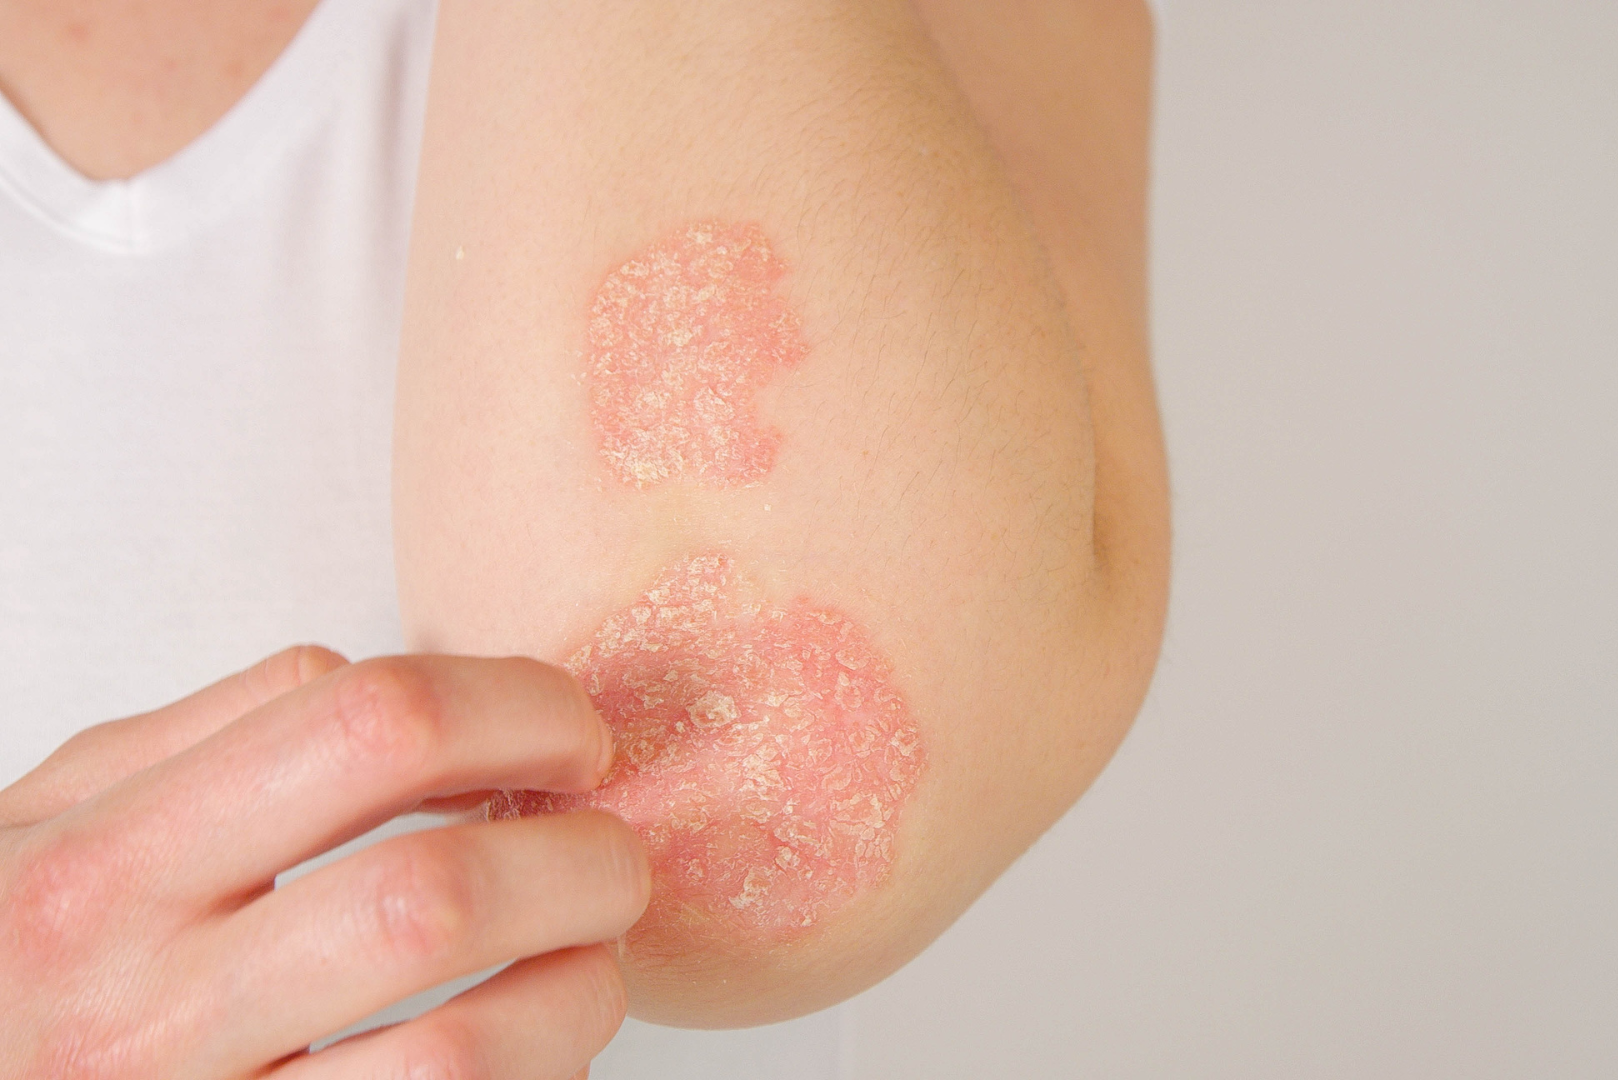 psoriasis skin condition treatments